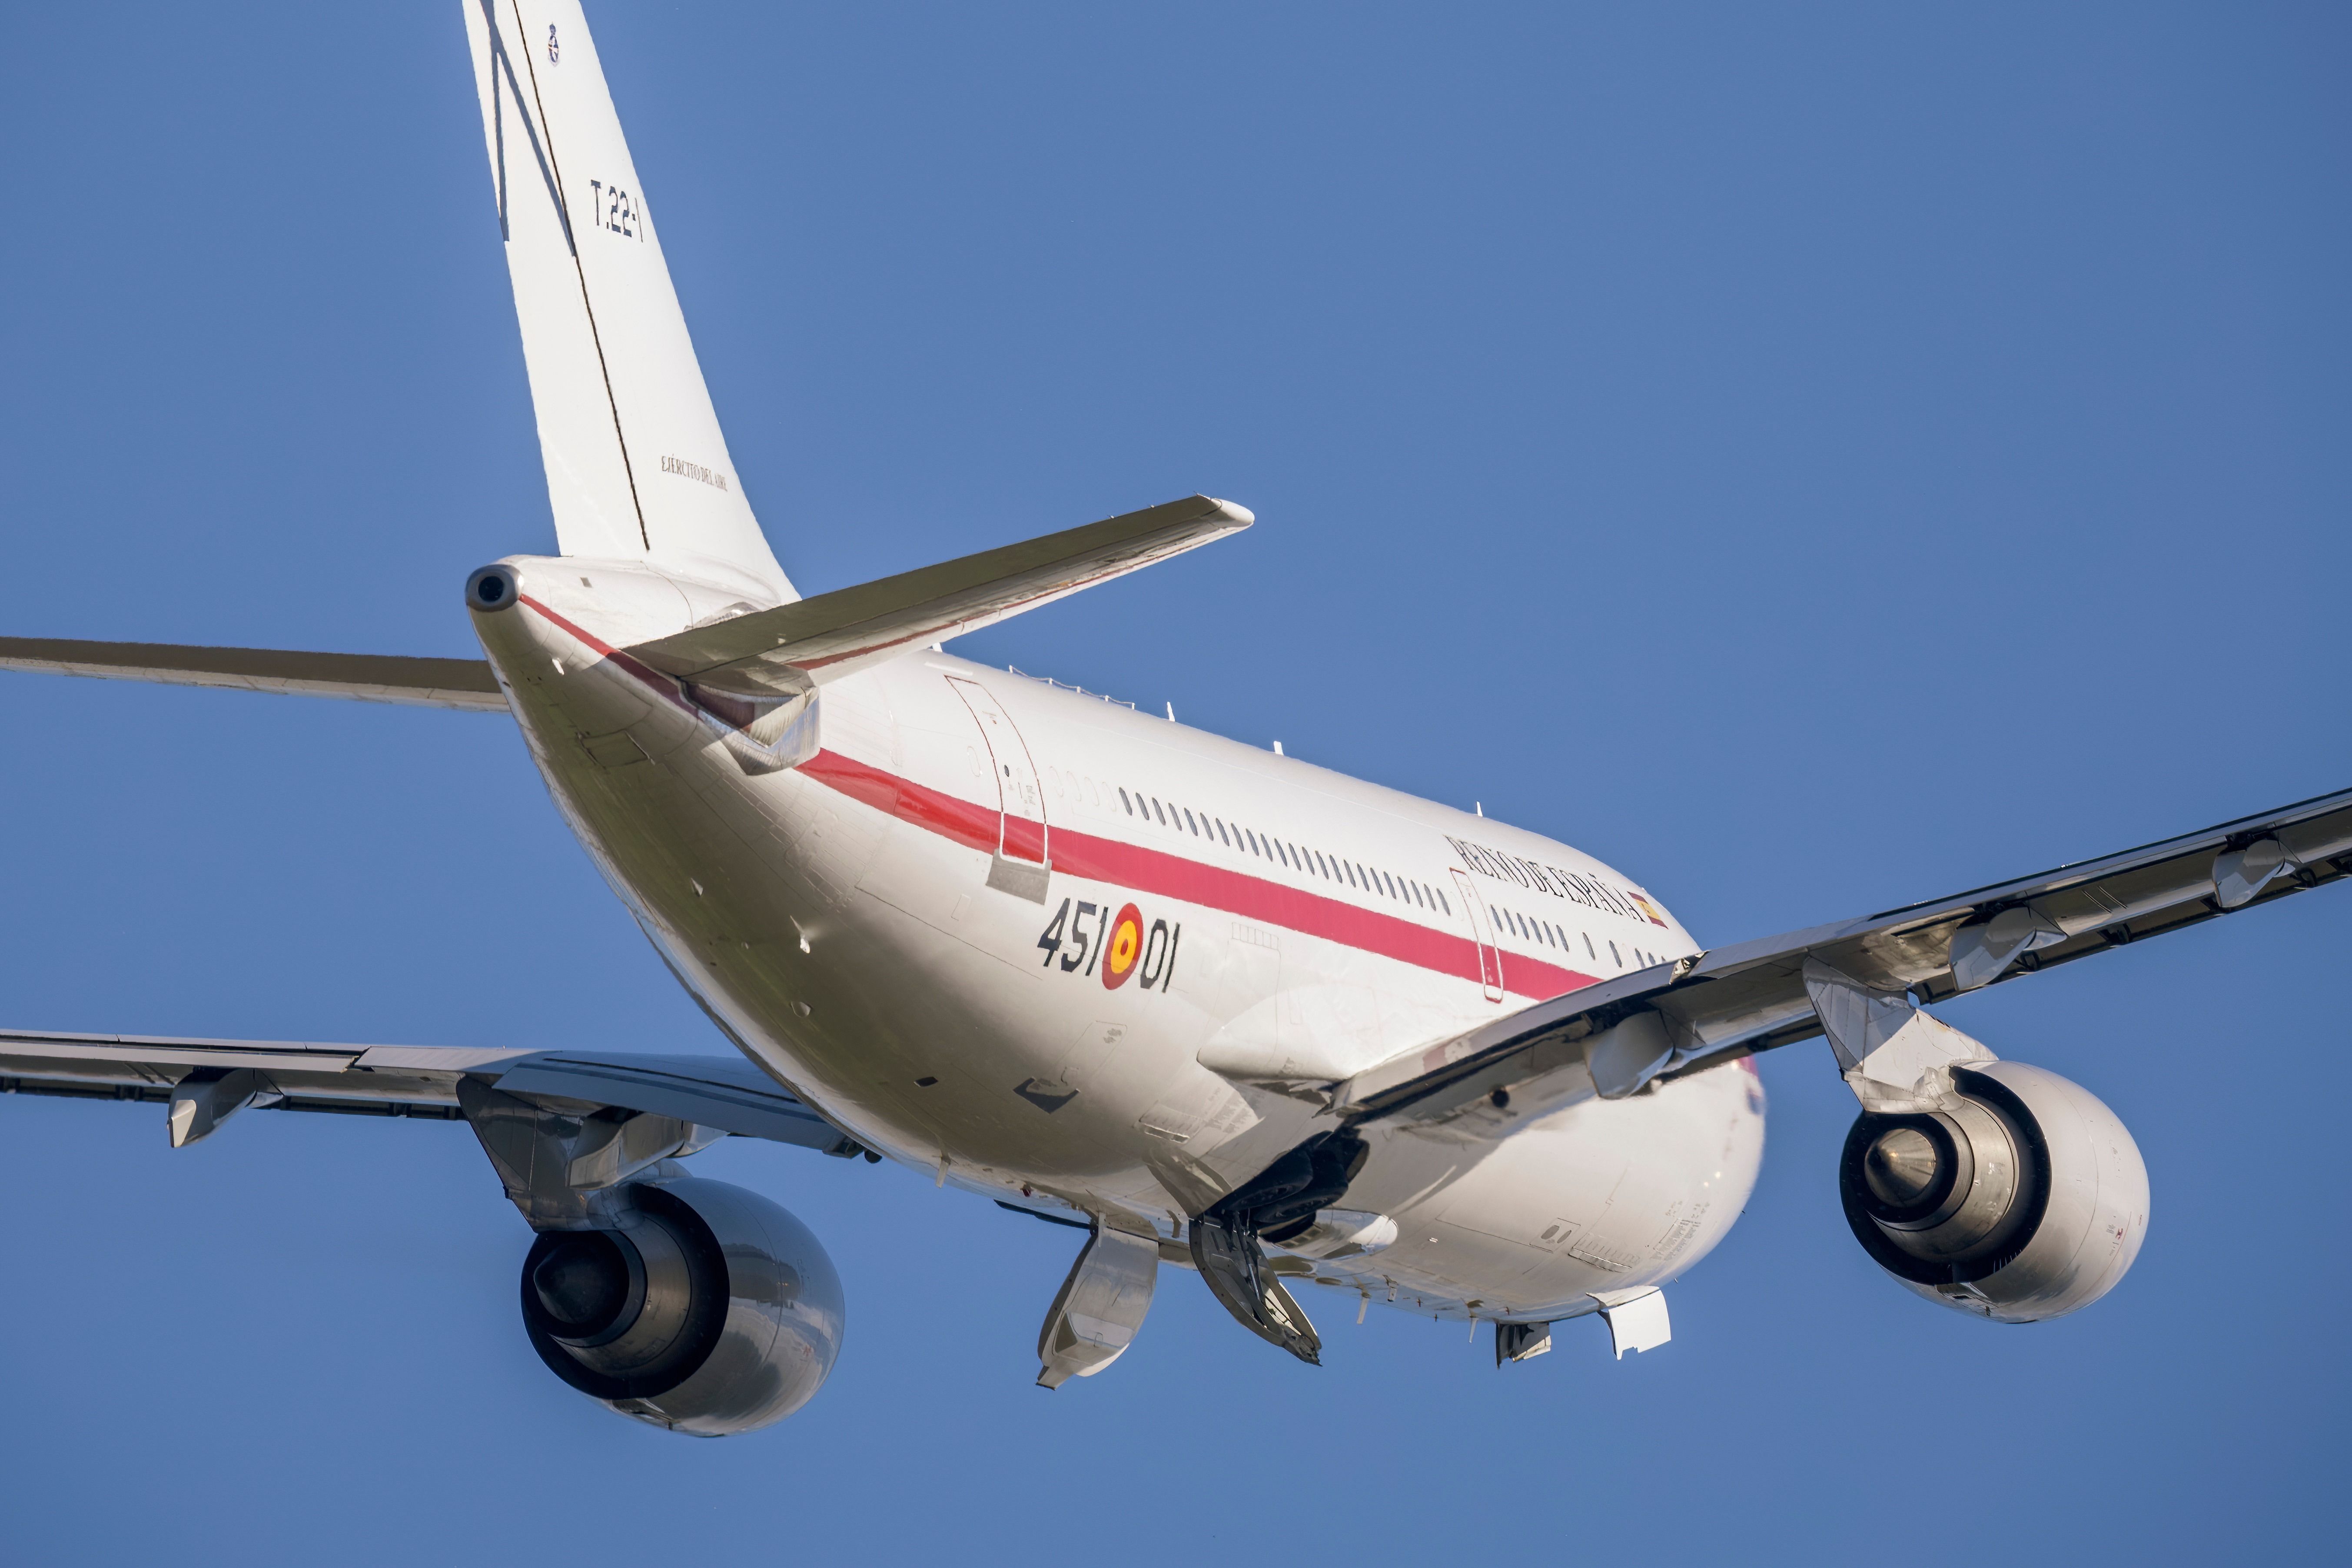 A Spanish Air Force Airbus A310-300 flying in the sky.